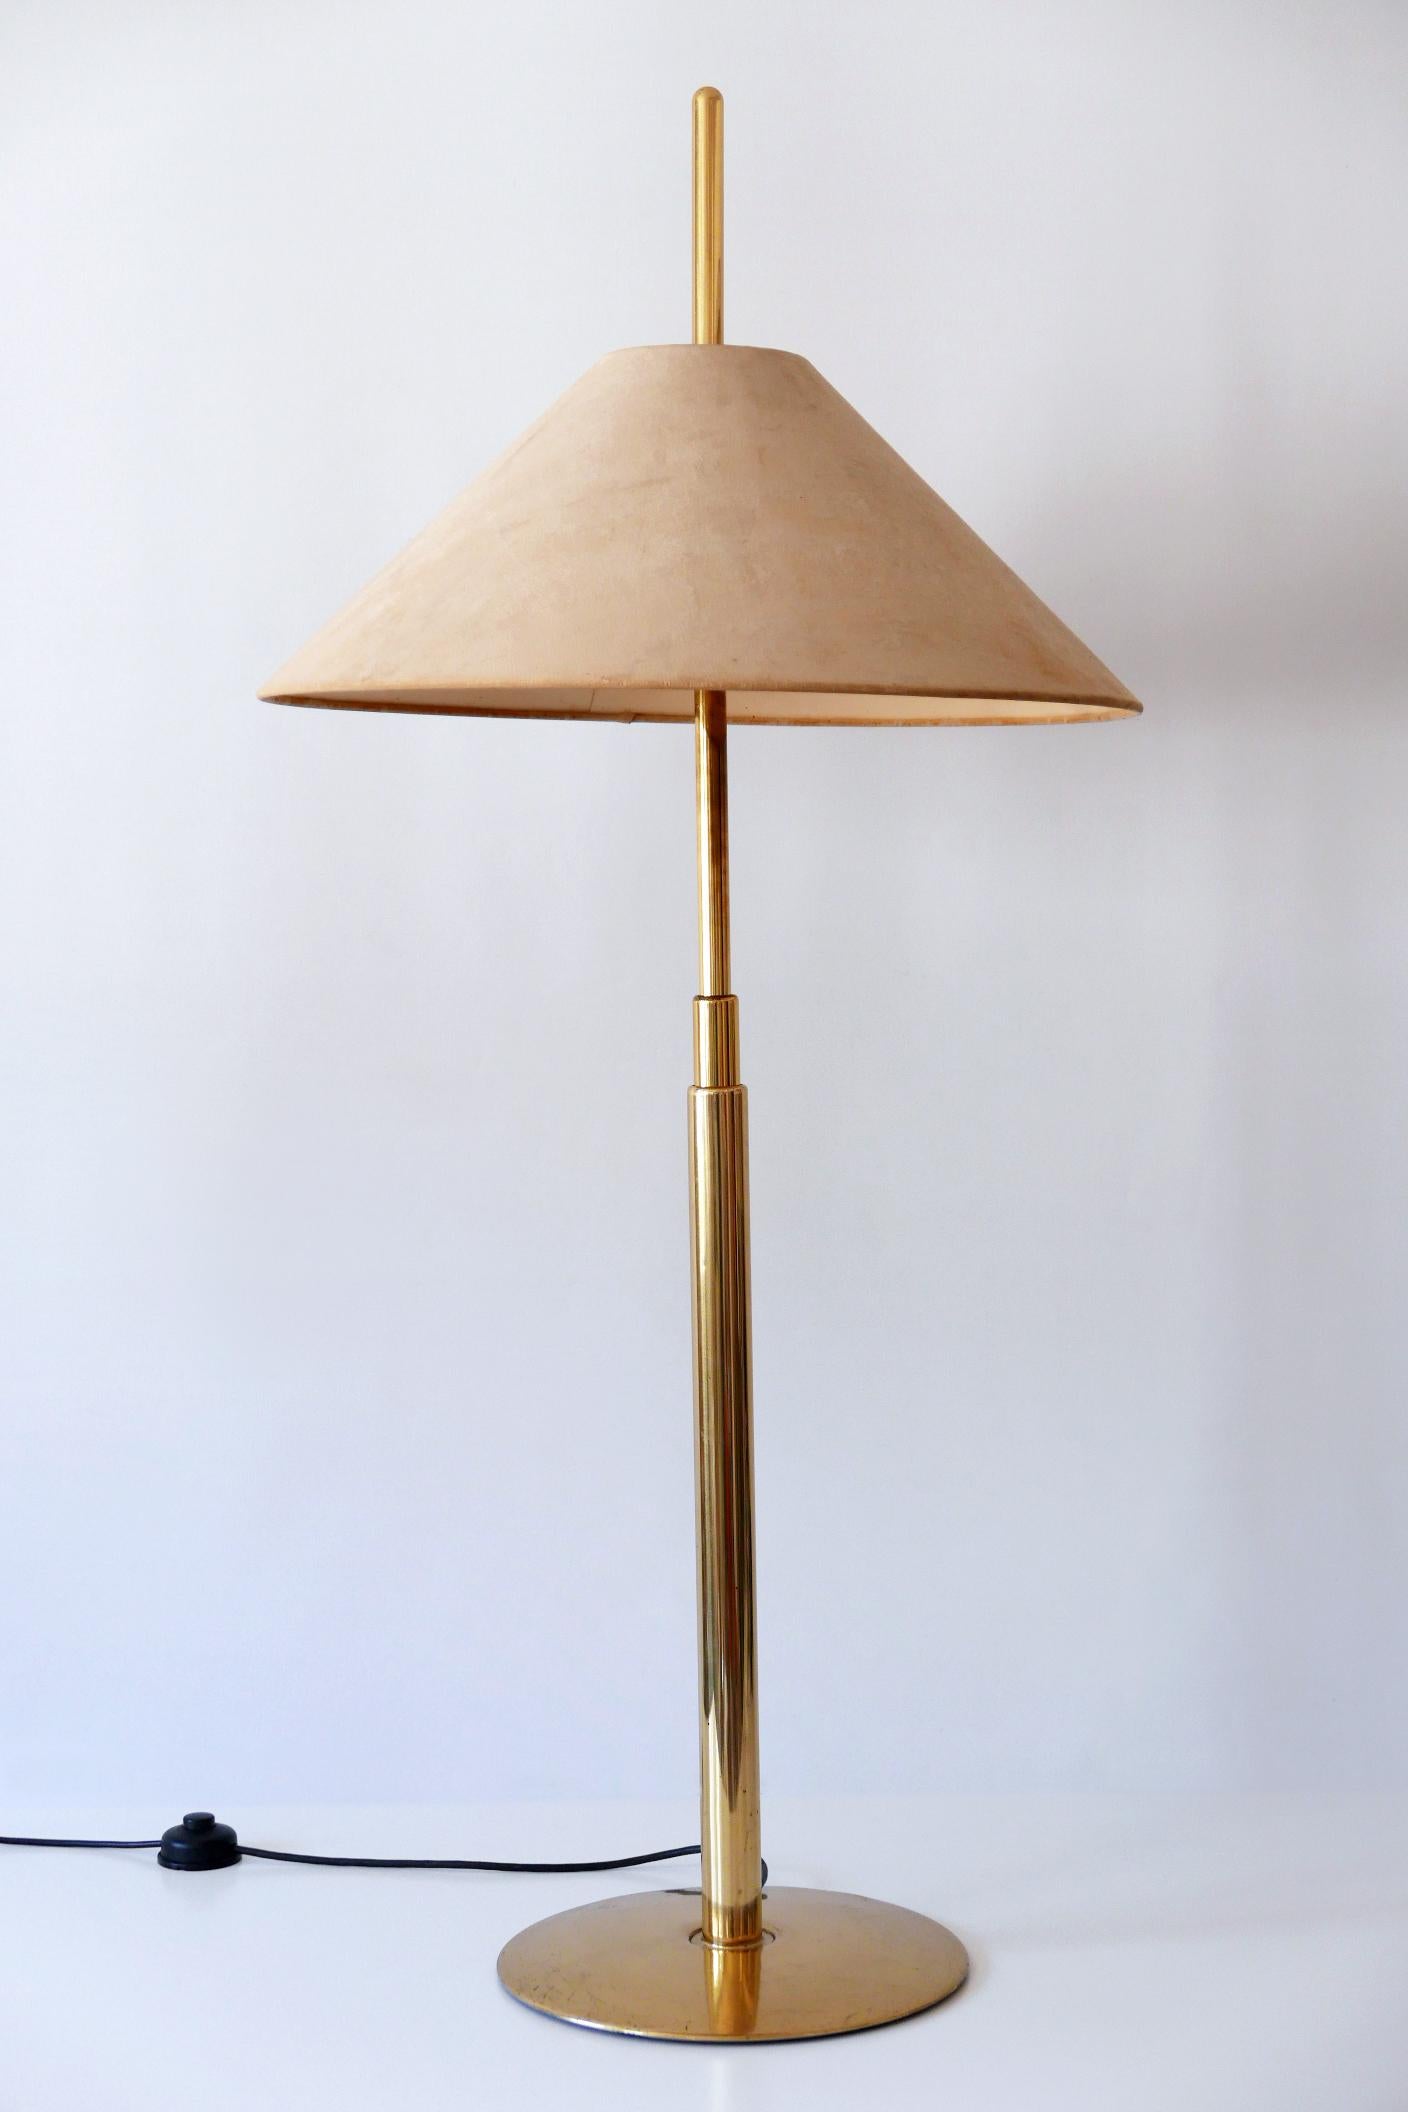 Extremely rare & elegant Mid-Century Modern telescopic brass floor lamp. Designed by Ingo Maurer for Design M, Germany, 1970s. Adjustable height due to telescopic arm. This floor lamp is extremely hard to find. 

Executed in polished brass and